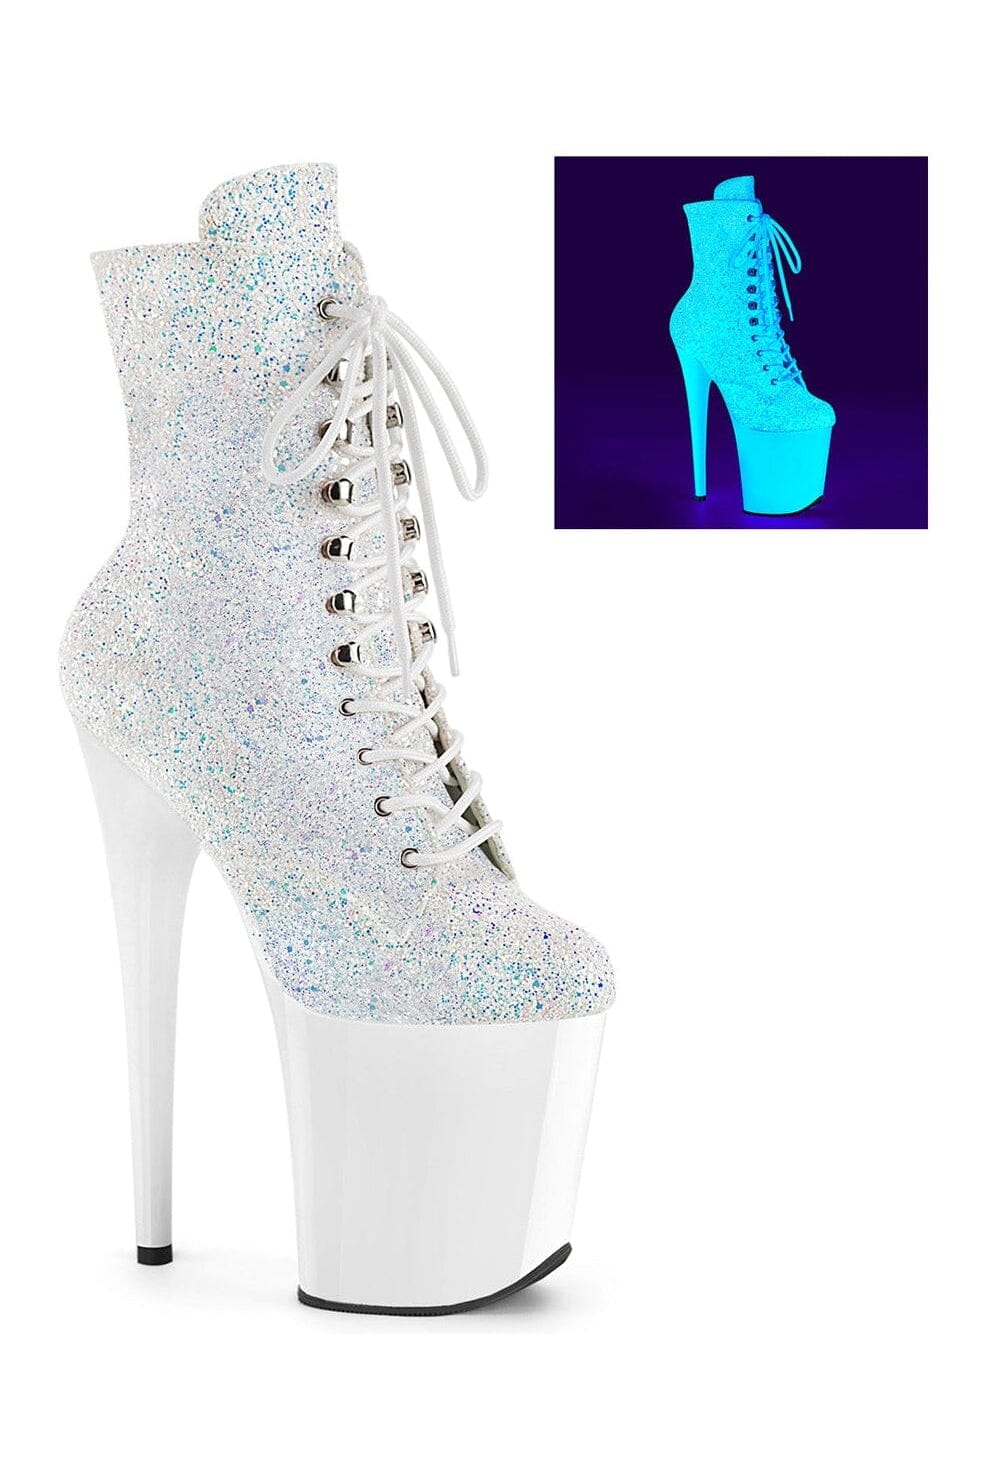 Pleaser White Ankle Boots Platform Stripper Shoes | Buy at Sexyshoes.com